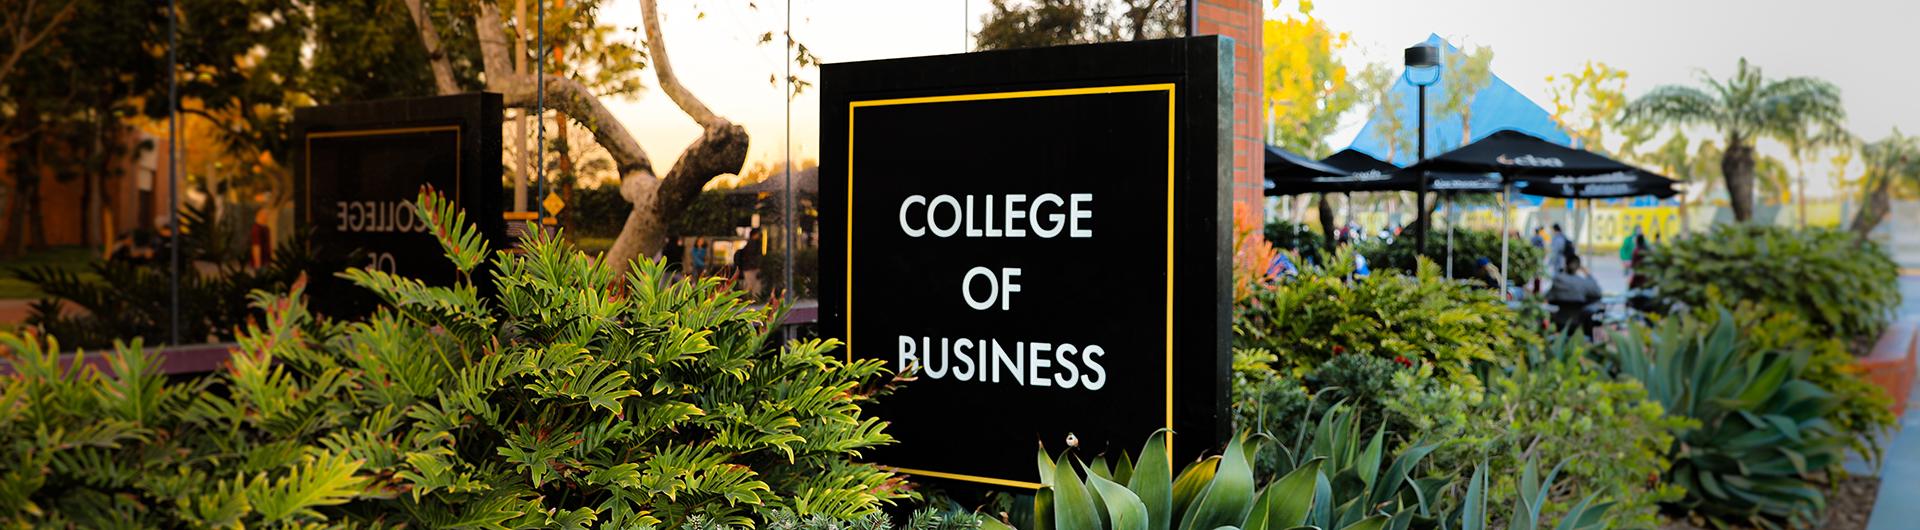 College of Business Offical Banner 